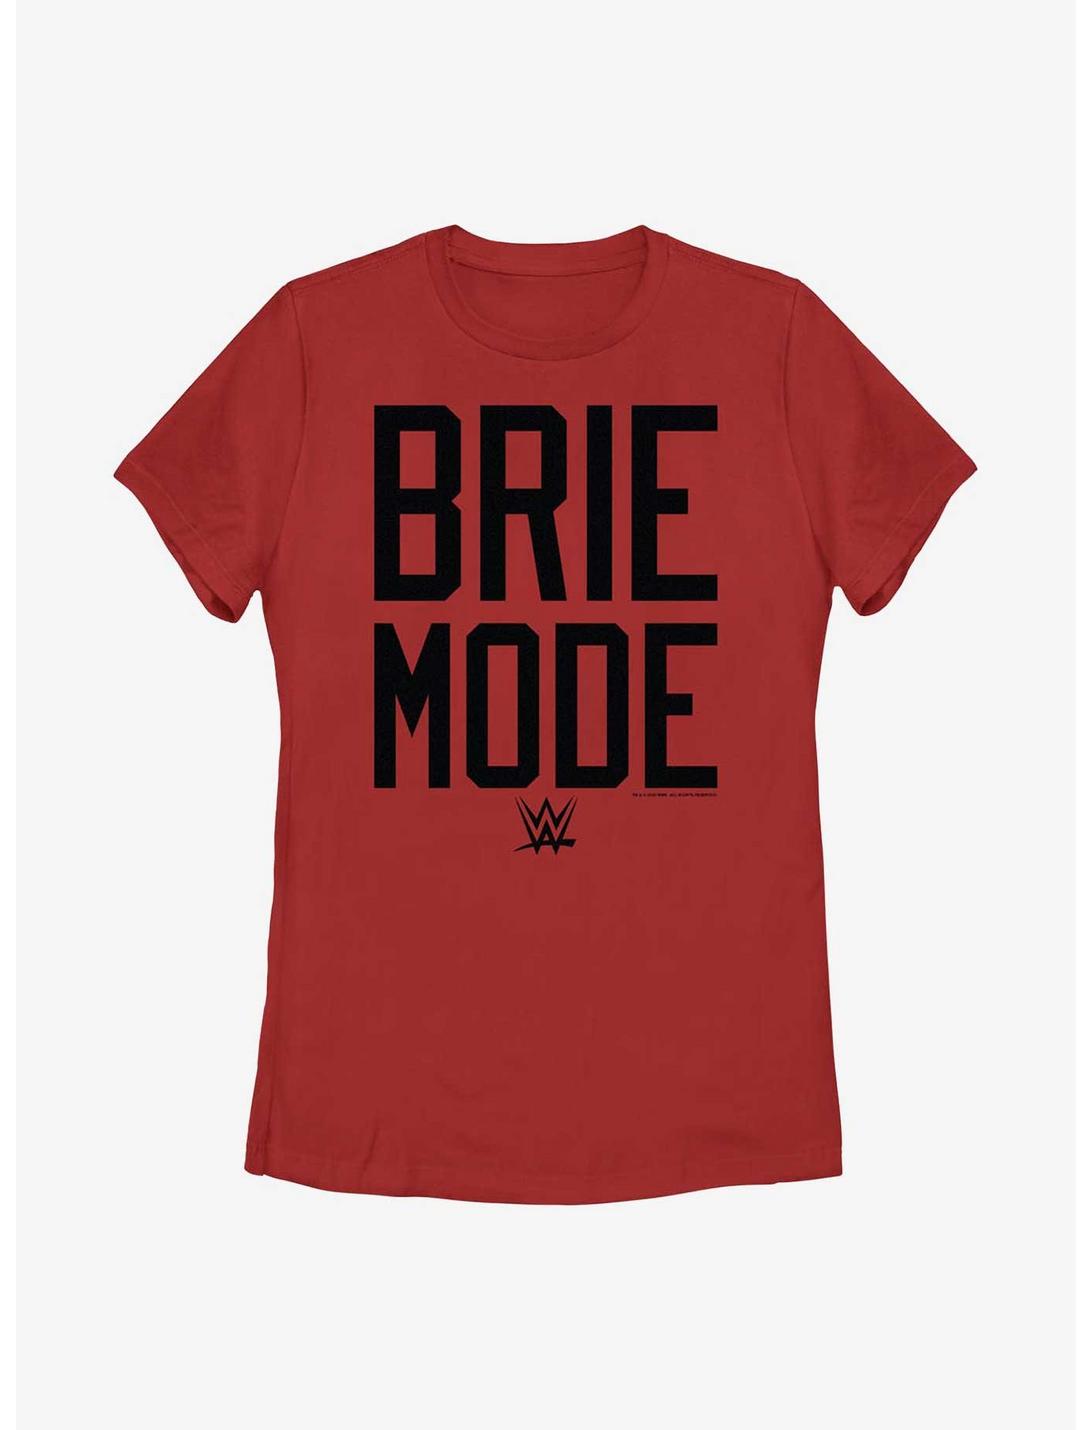 WWE The Bella Twins Brie Bella Brie Mode Womens T-Shirt, RED, hi-res